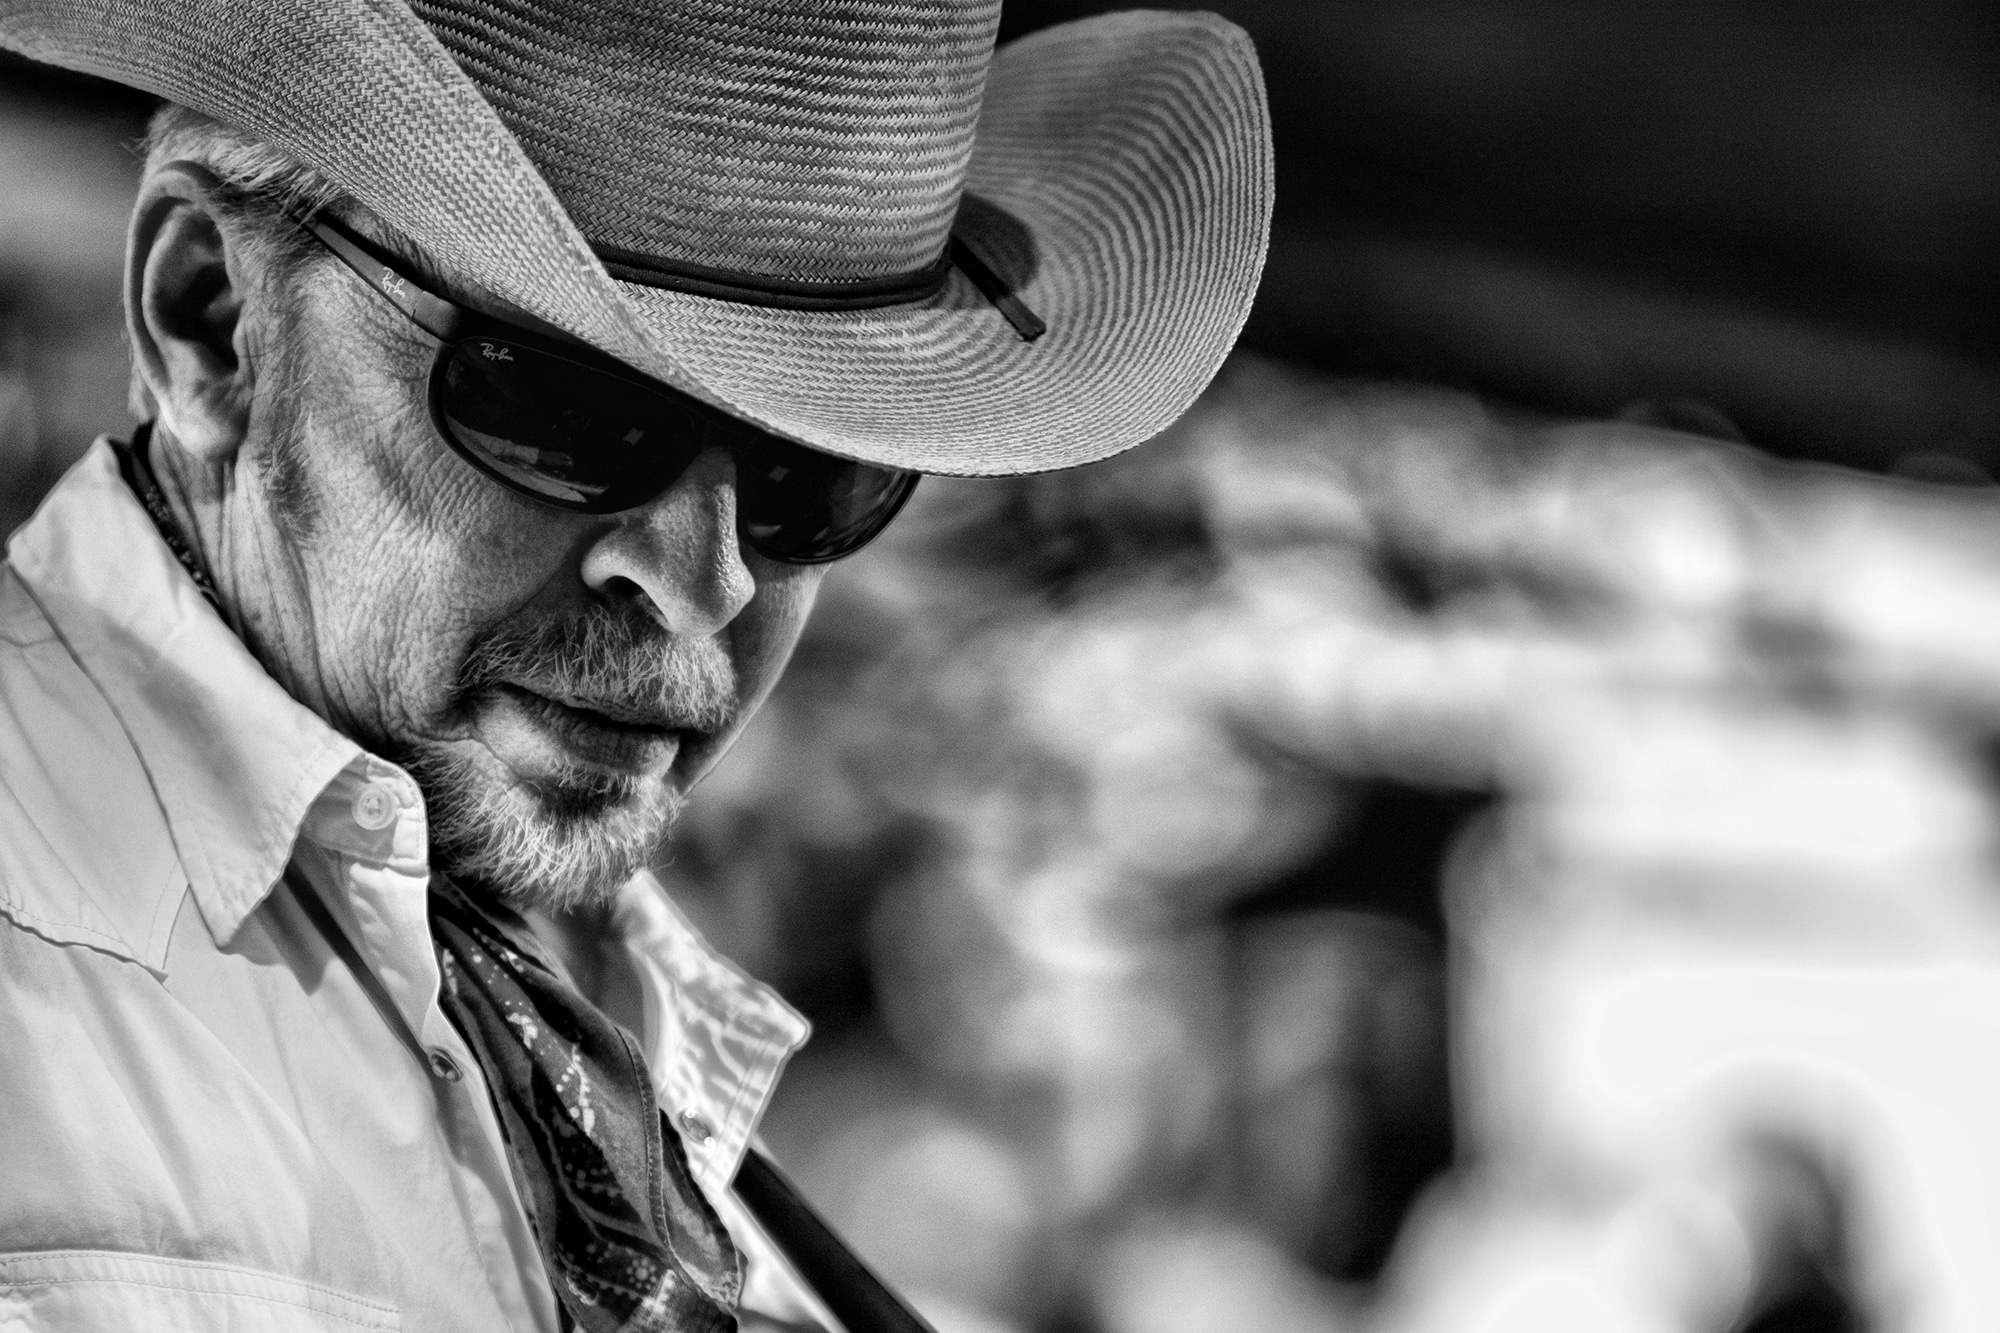 Dave Alvin: On Songwriting, Speculation and Maintaining His Own Muse